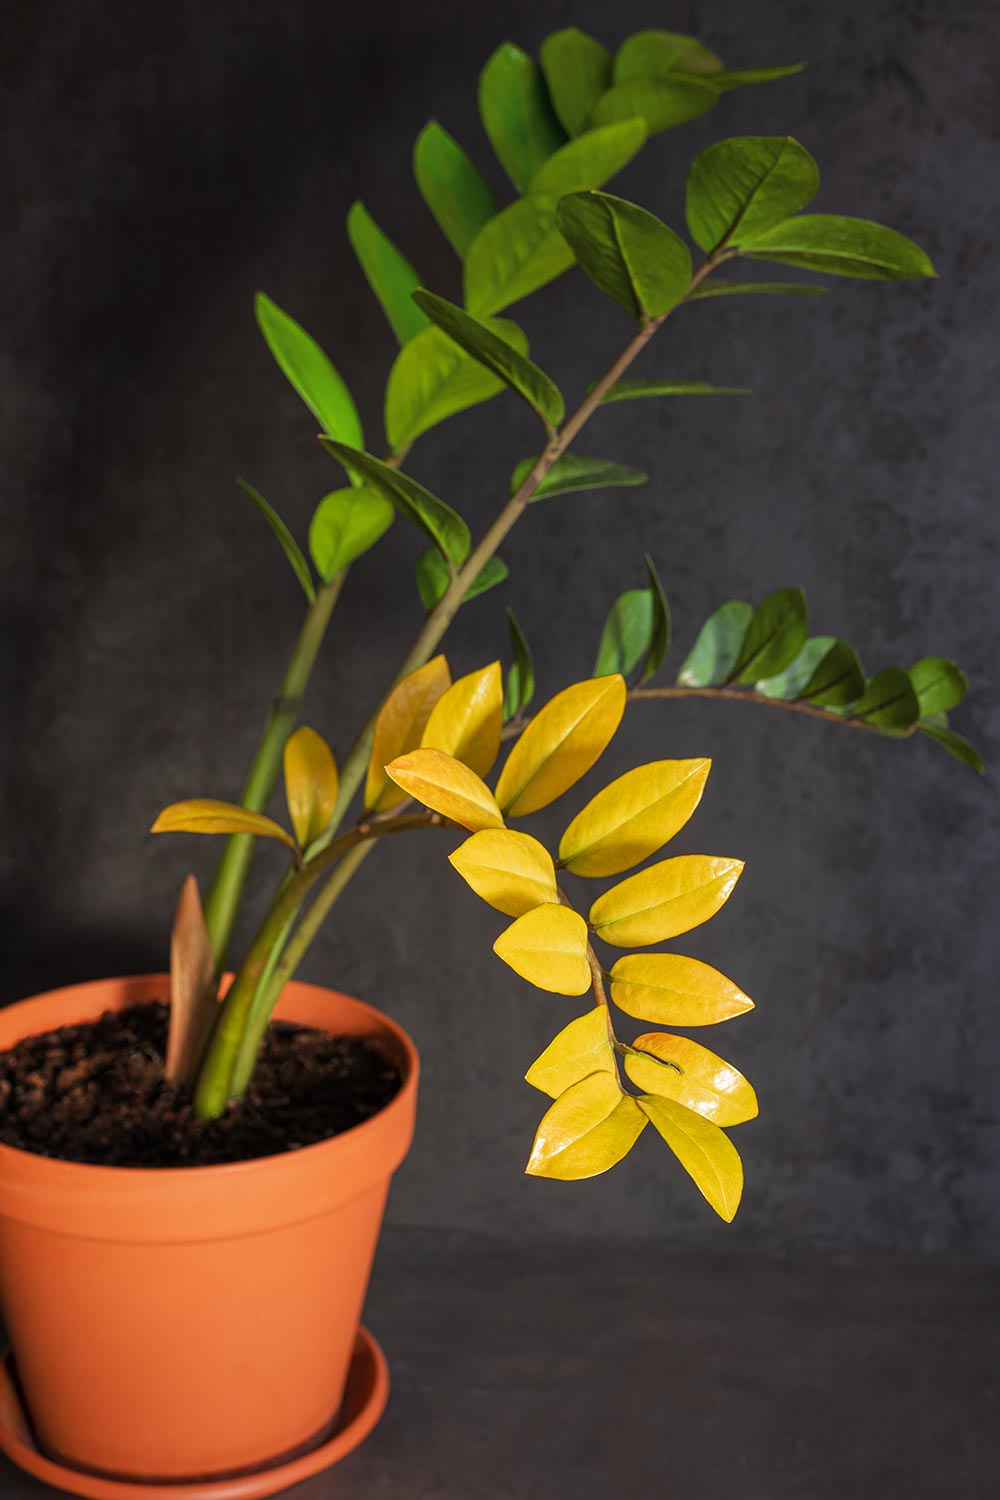 Why Does Your ZZ Plant Have Yellow Leaves?